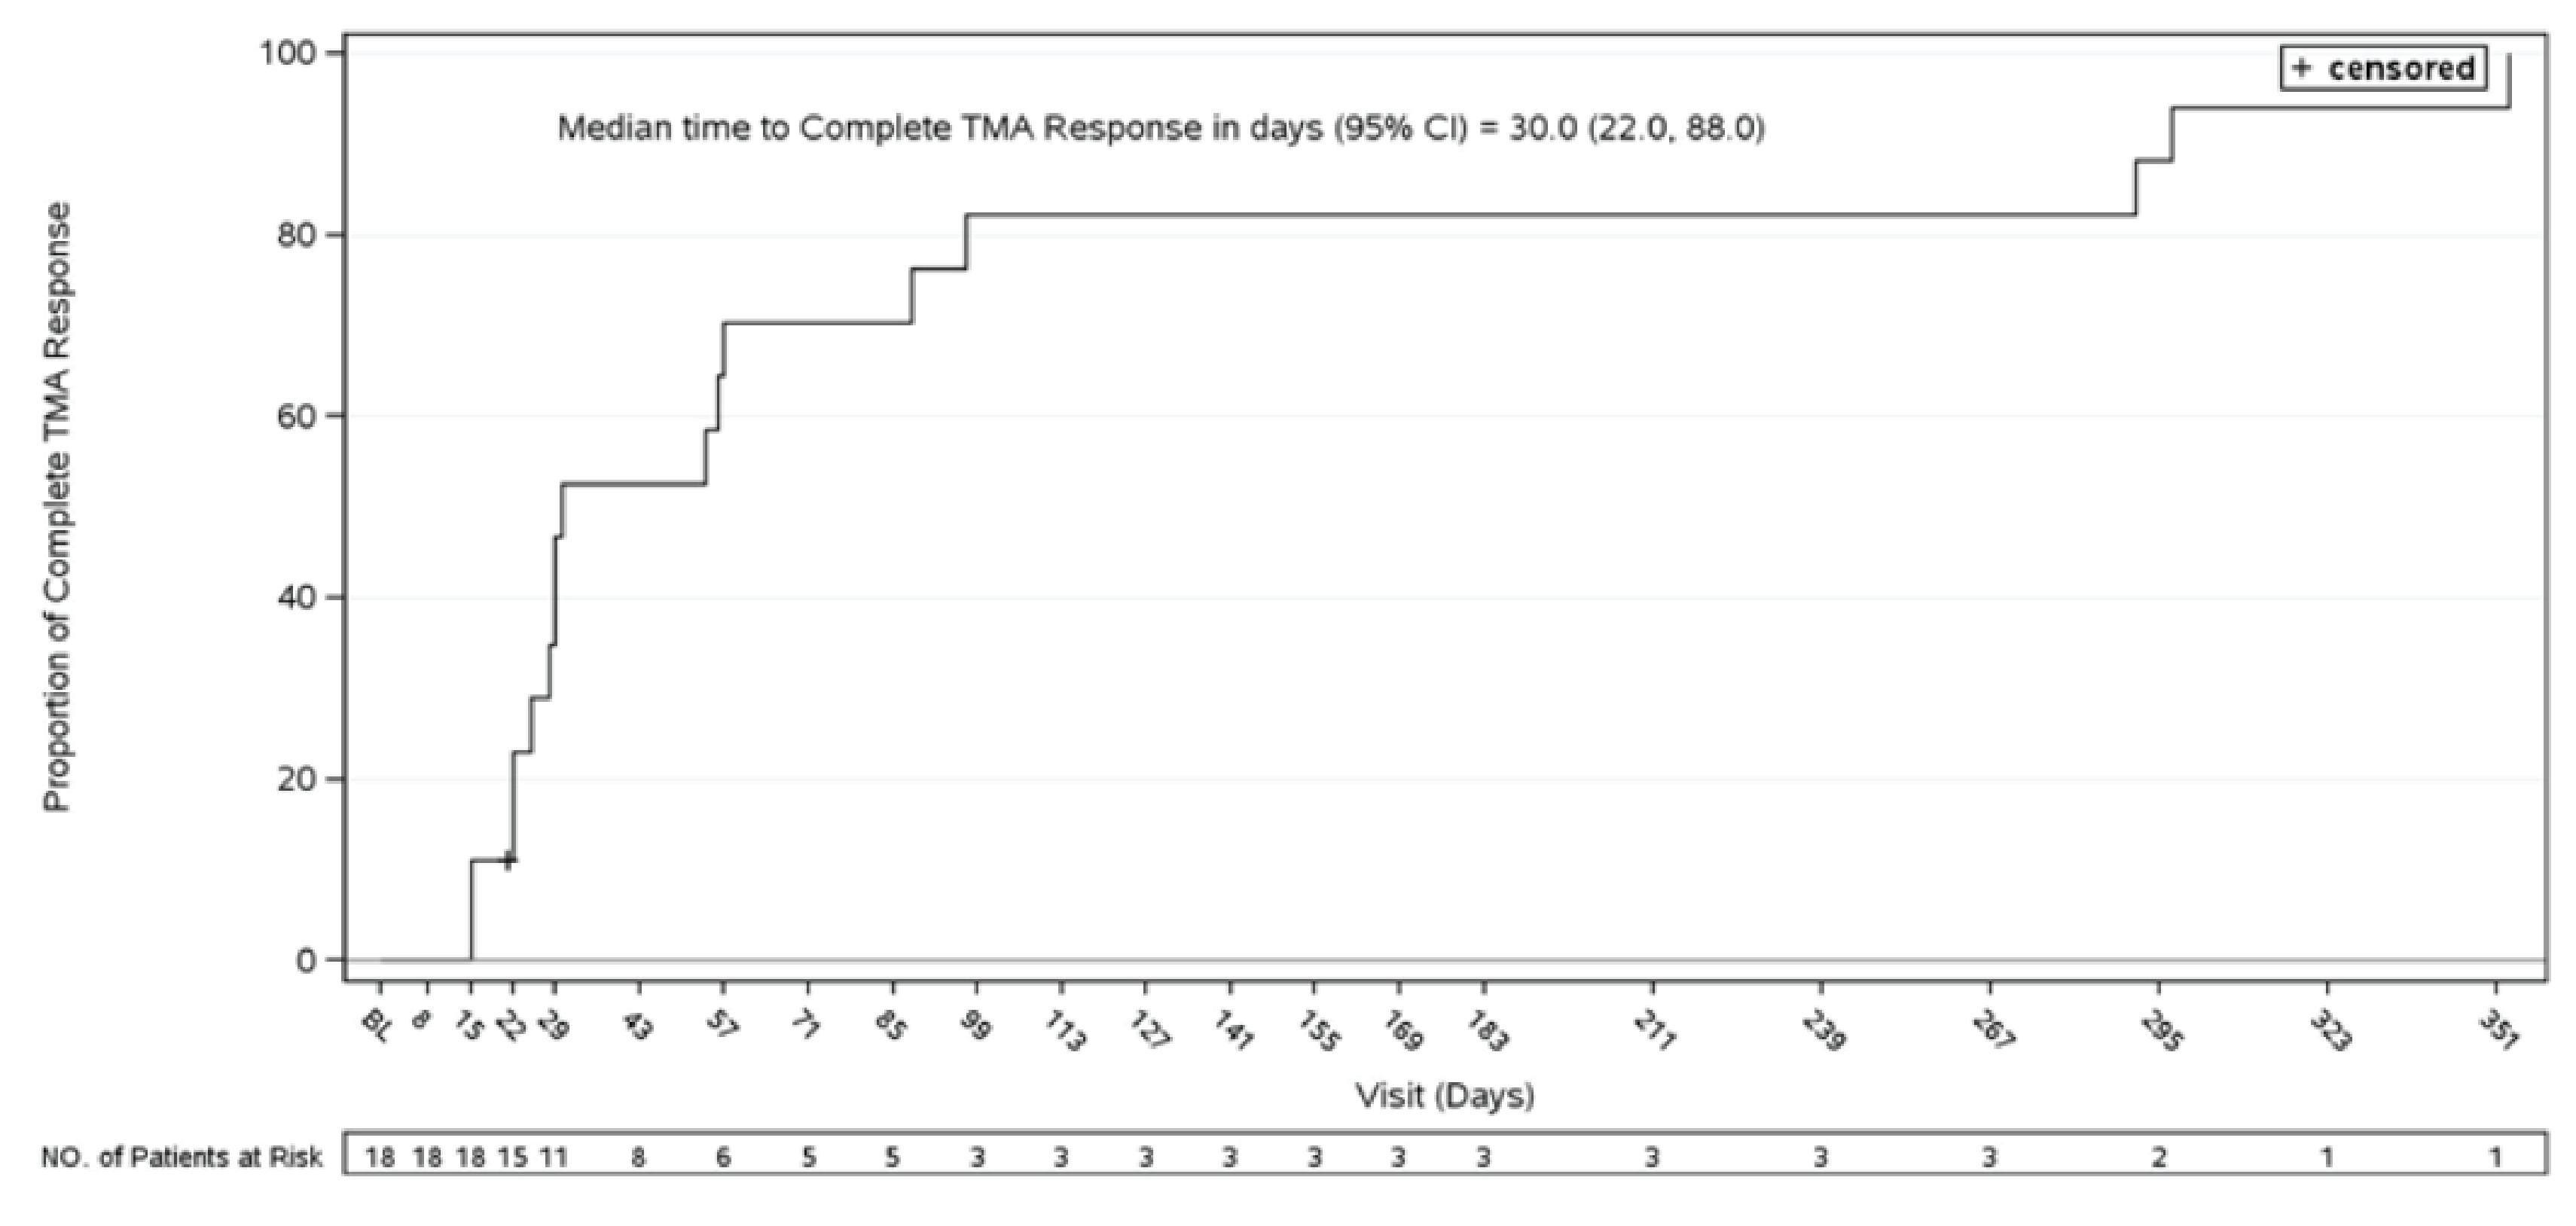 The median time to complete thrombotic microangiopathy response was 30 days and occurred as early as 15 days following the first dose of ravulizumab. The latest time to complete thrombotic microangiopathy response was observed at 351 days.